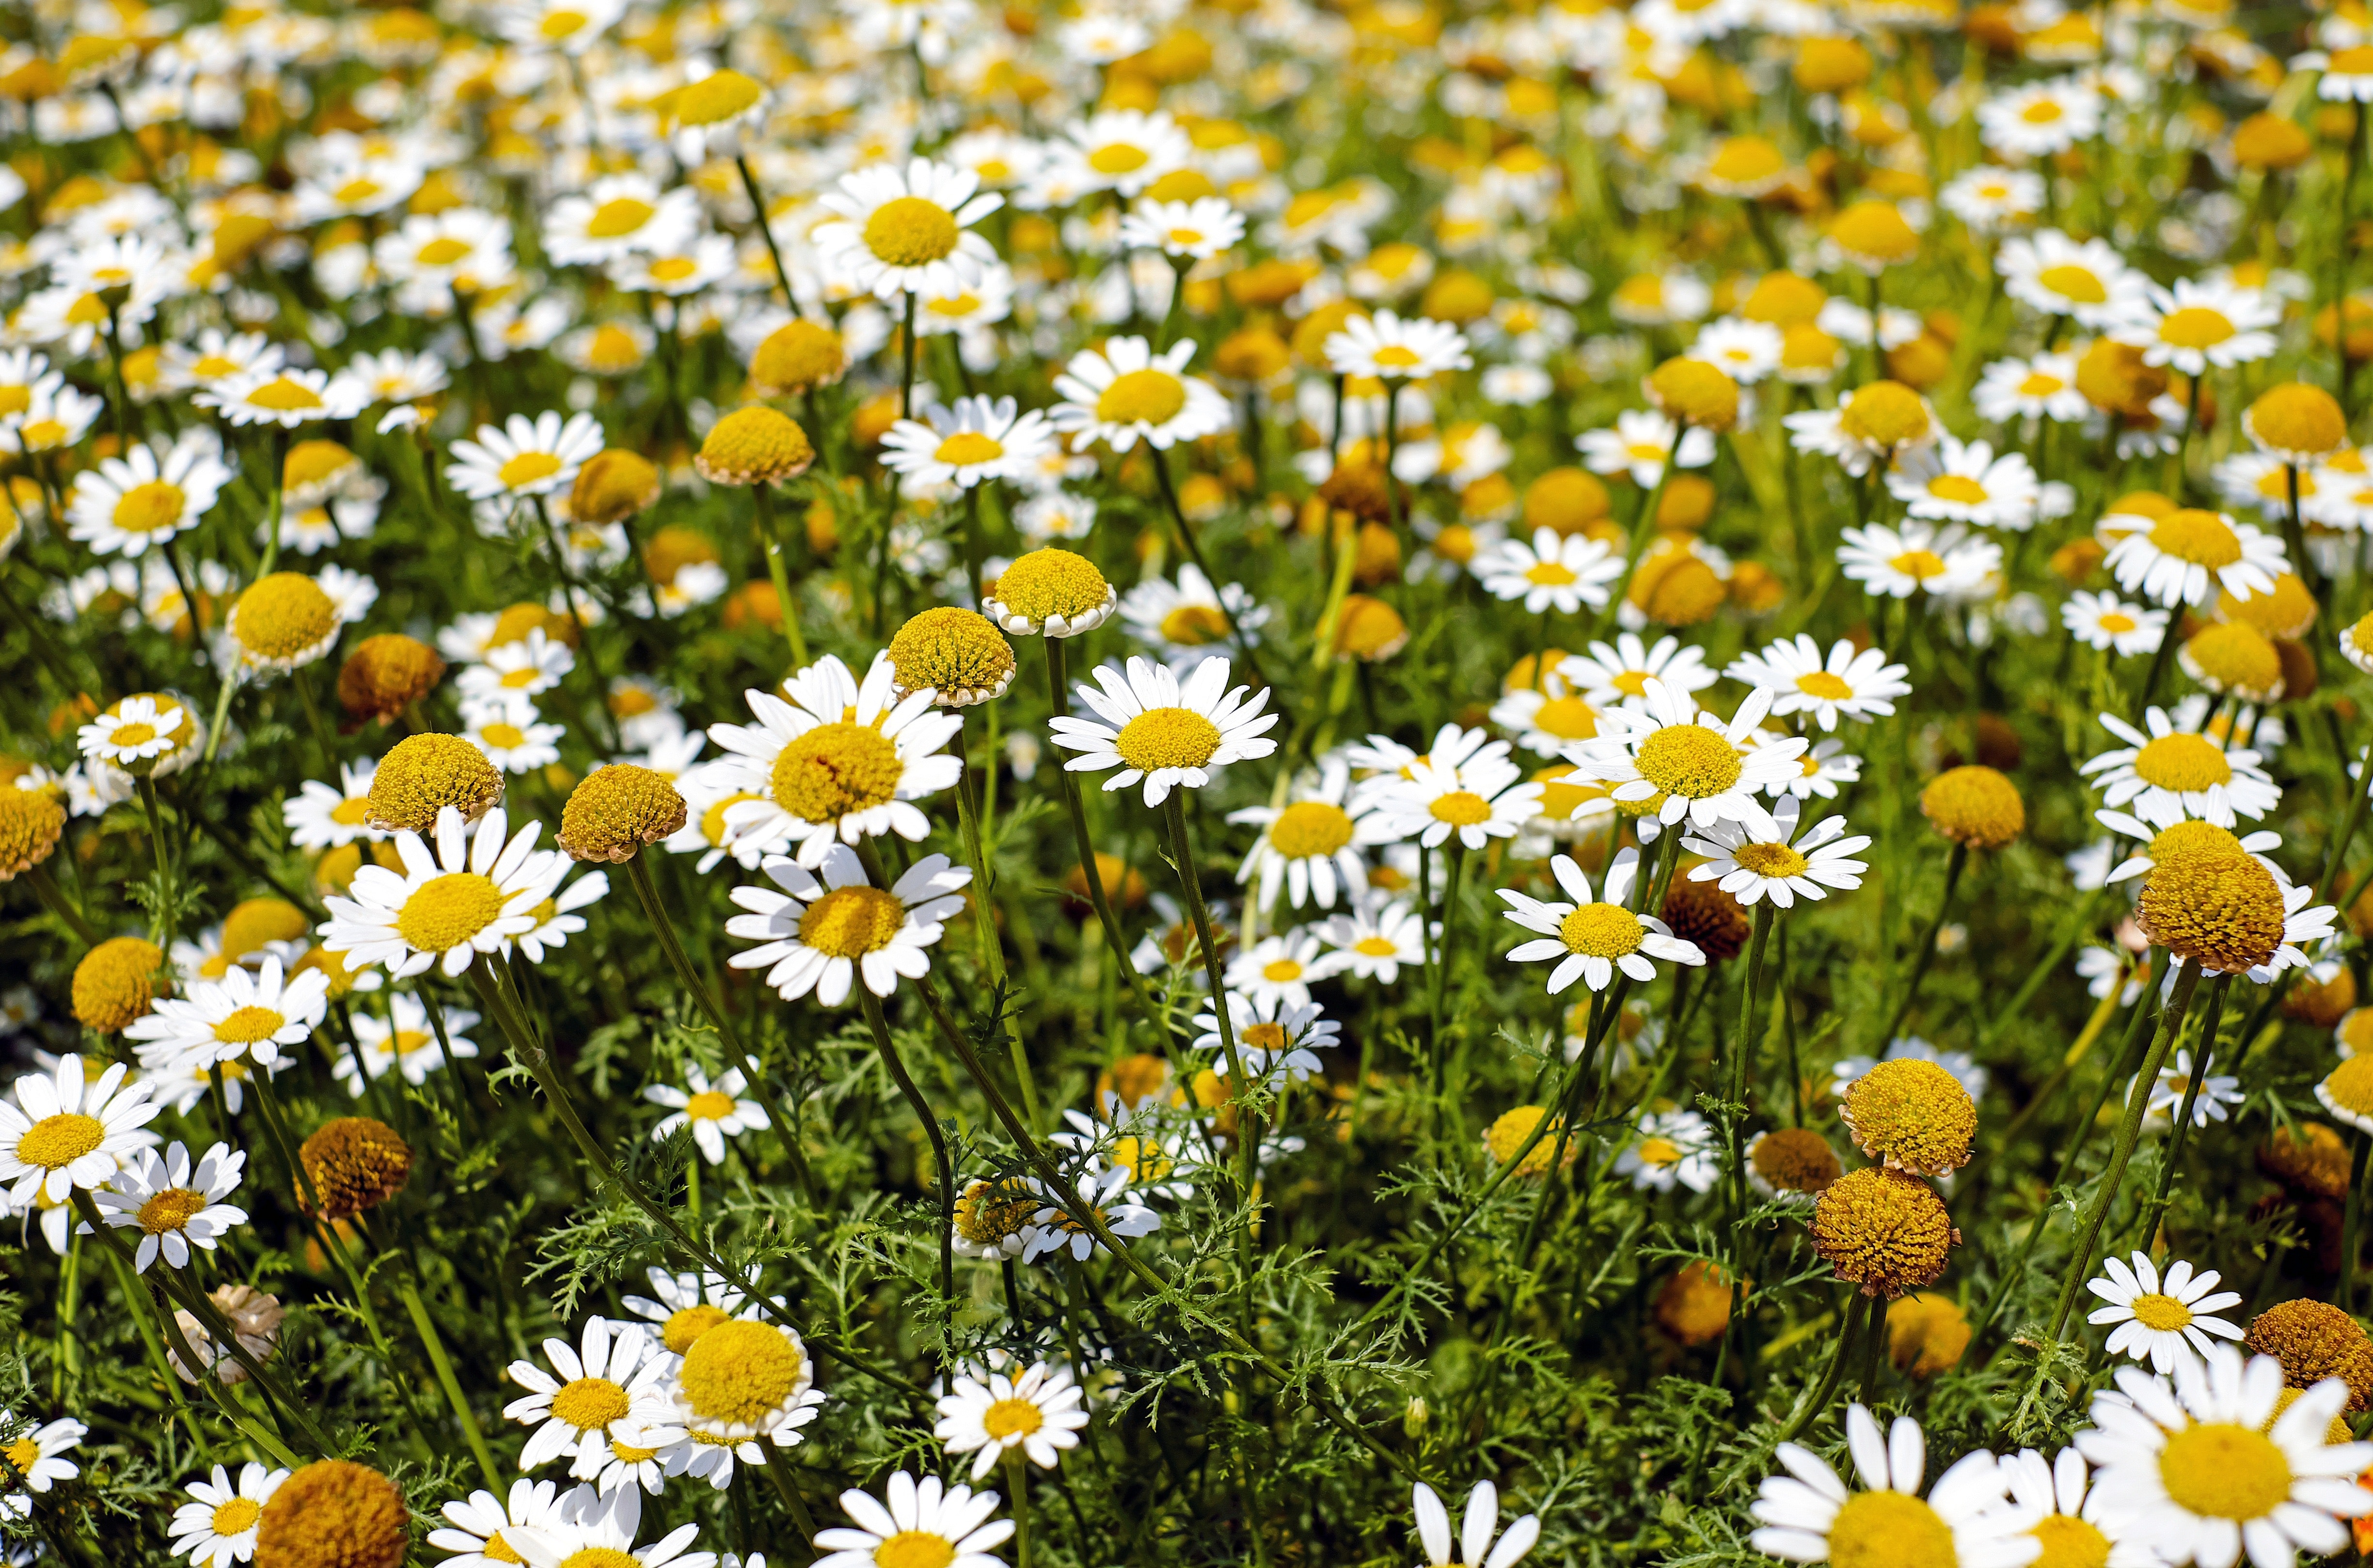 Shallow Focus Photography of Yellow and White Flowers during Daytime, Bloom, Growth, Summer, Season, HQ Photo